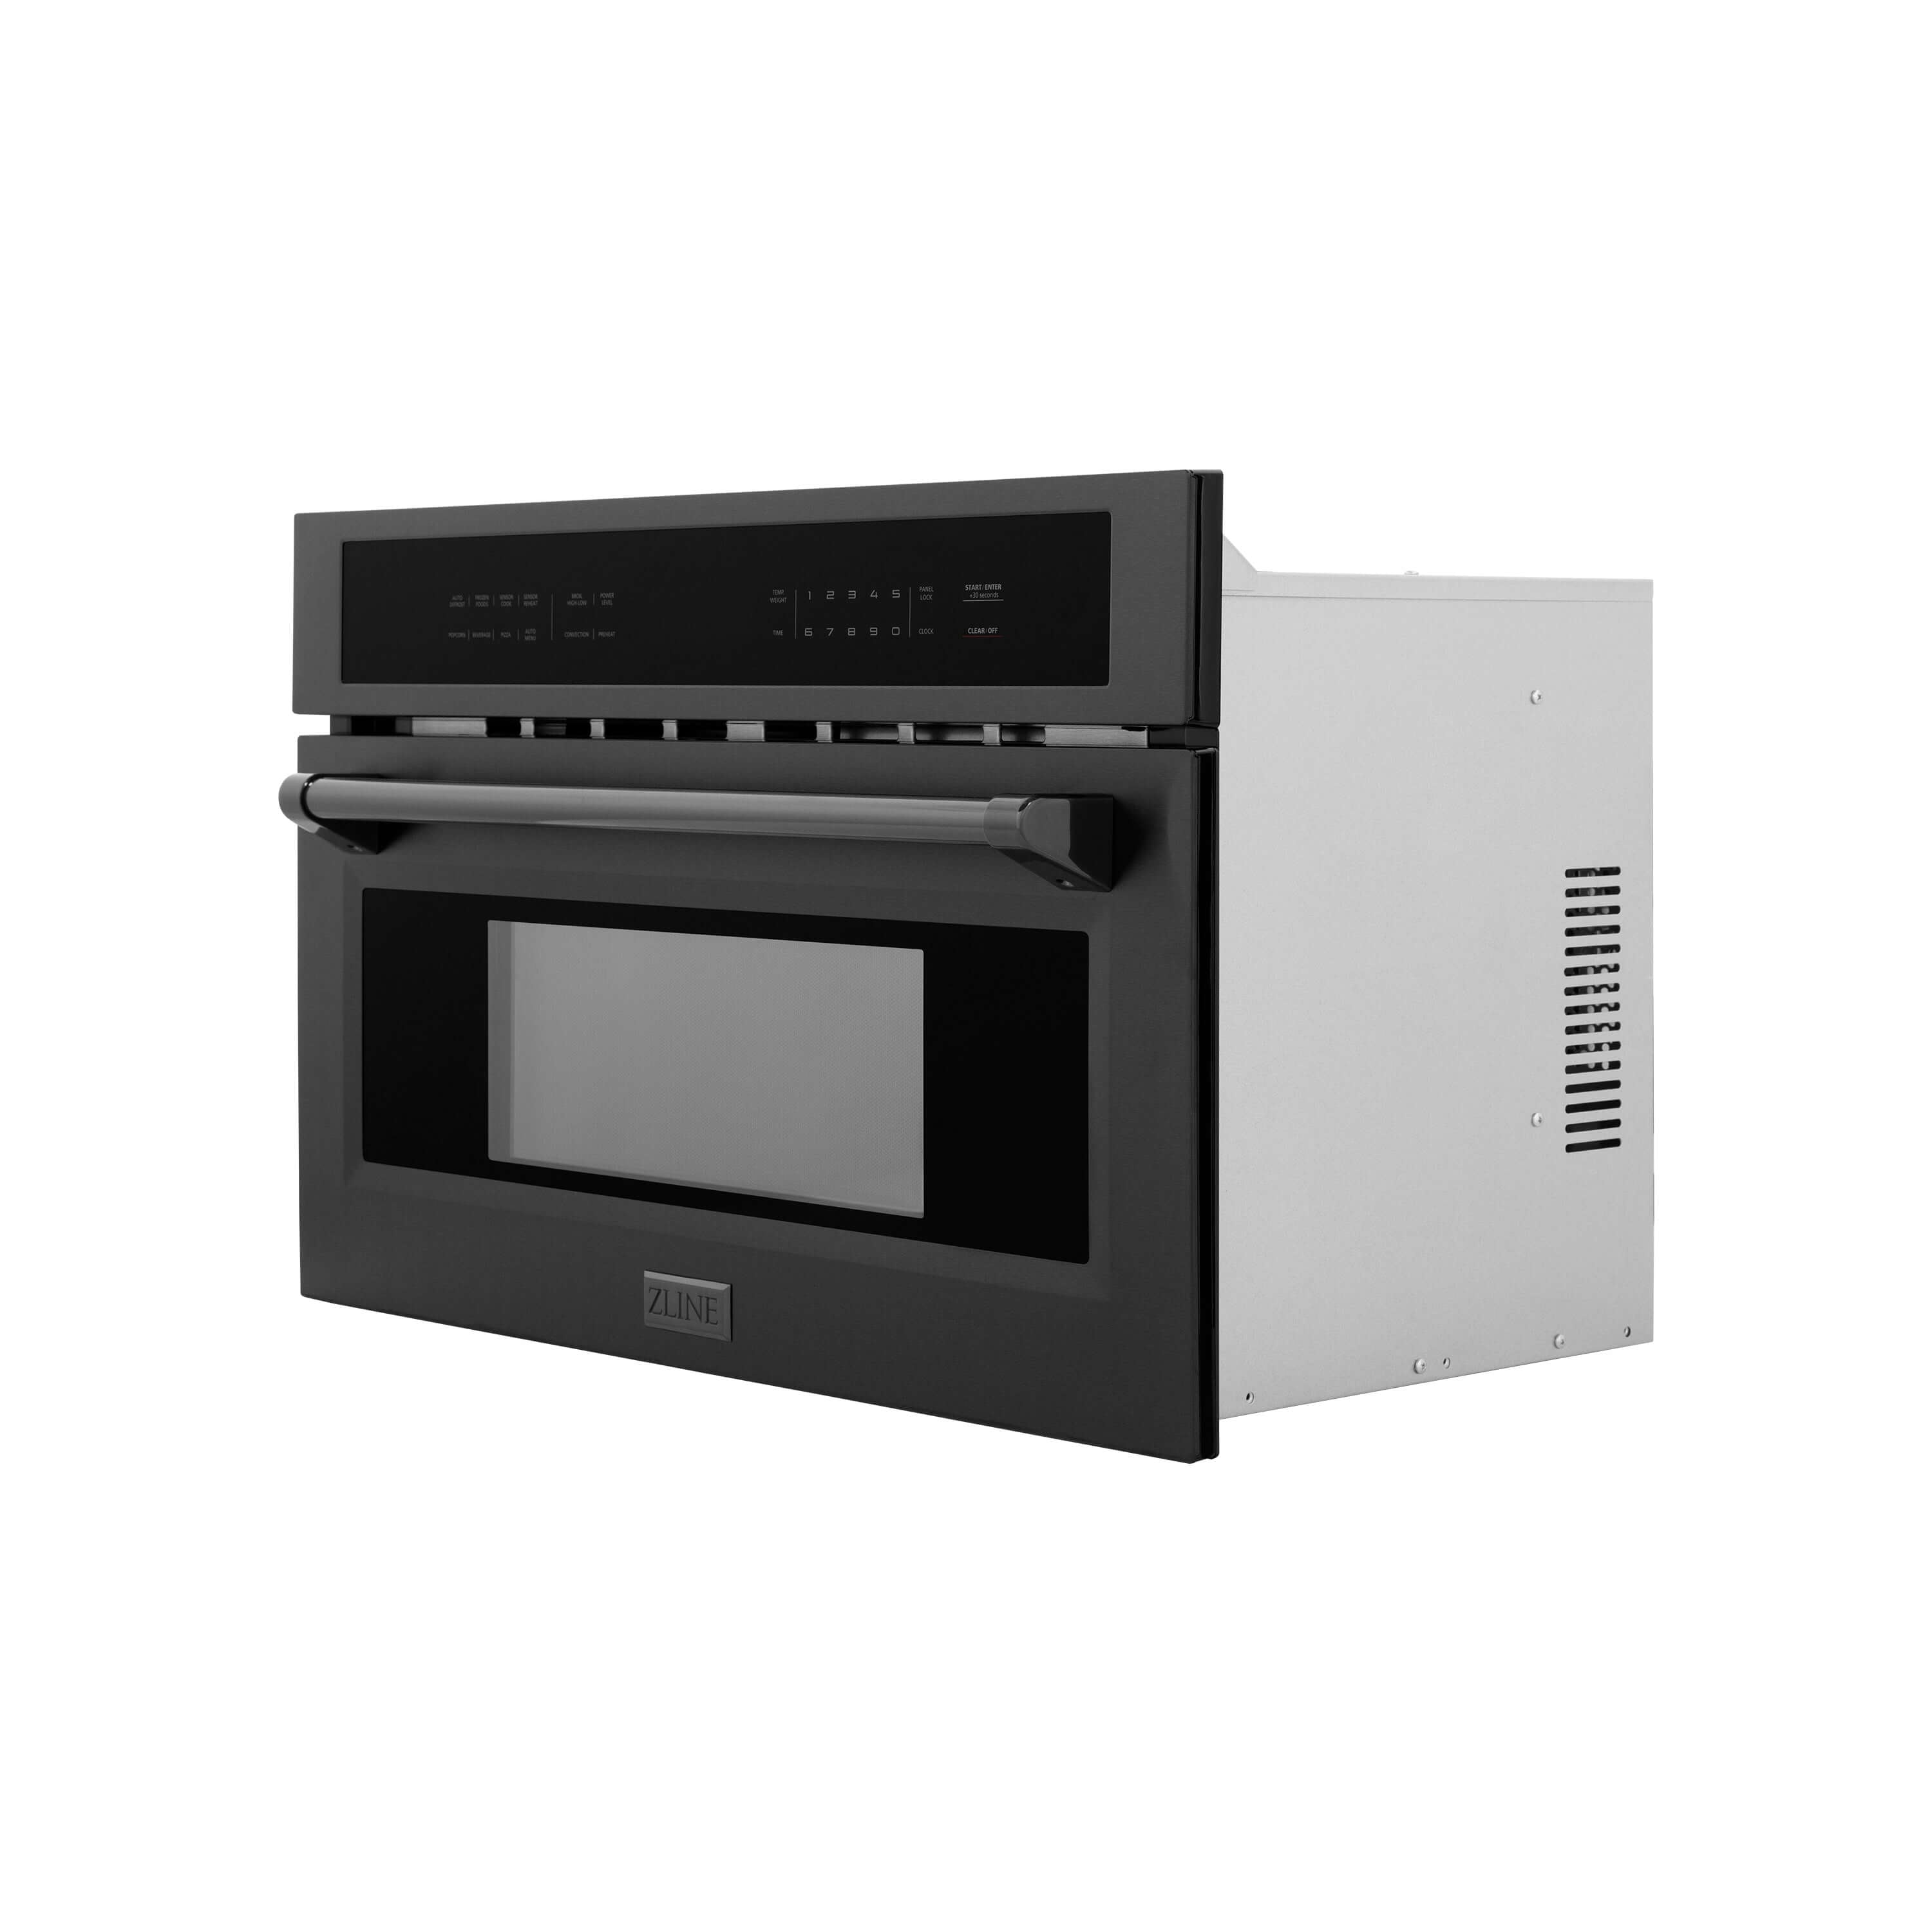 ZLINE 30 in. 1.6 cu ft. Black Stainless Steel Built-in Convection Microwave Oven (MWO-30-BS) Side View Door Closed